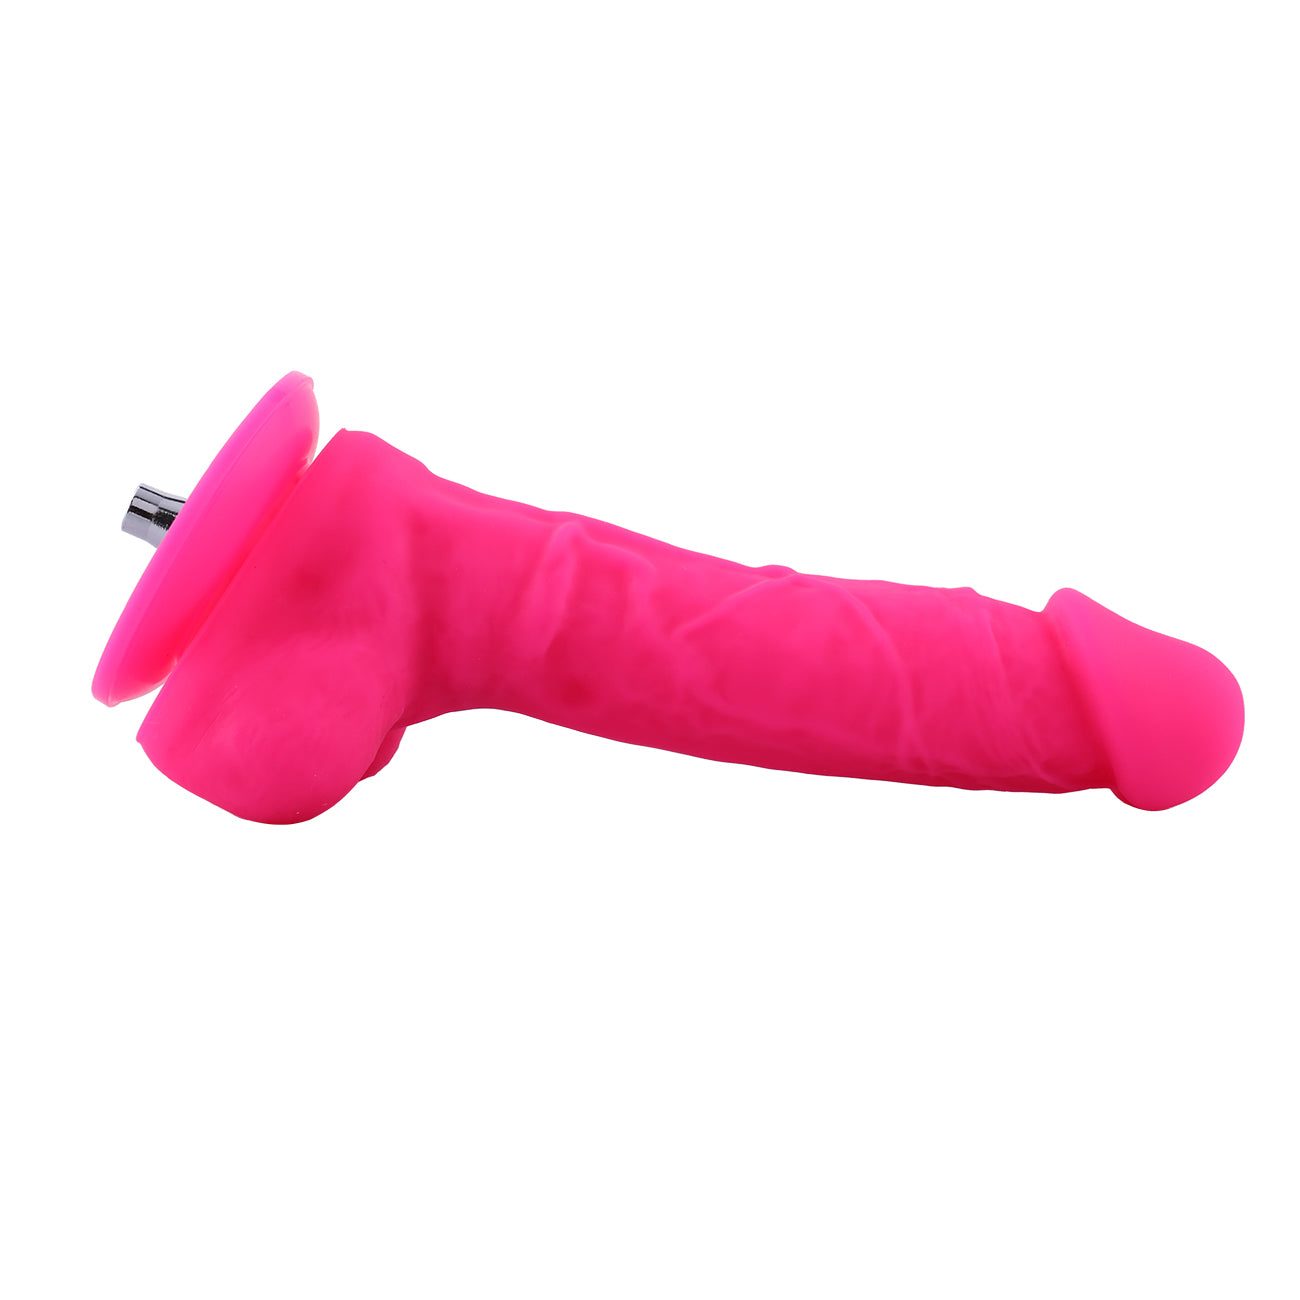 Hismith Premium - 23cm Long Silicone Dildo with Quick Air Connector - Pink